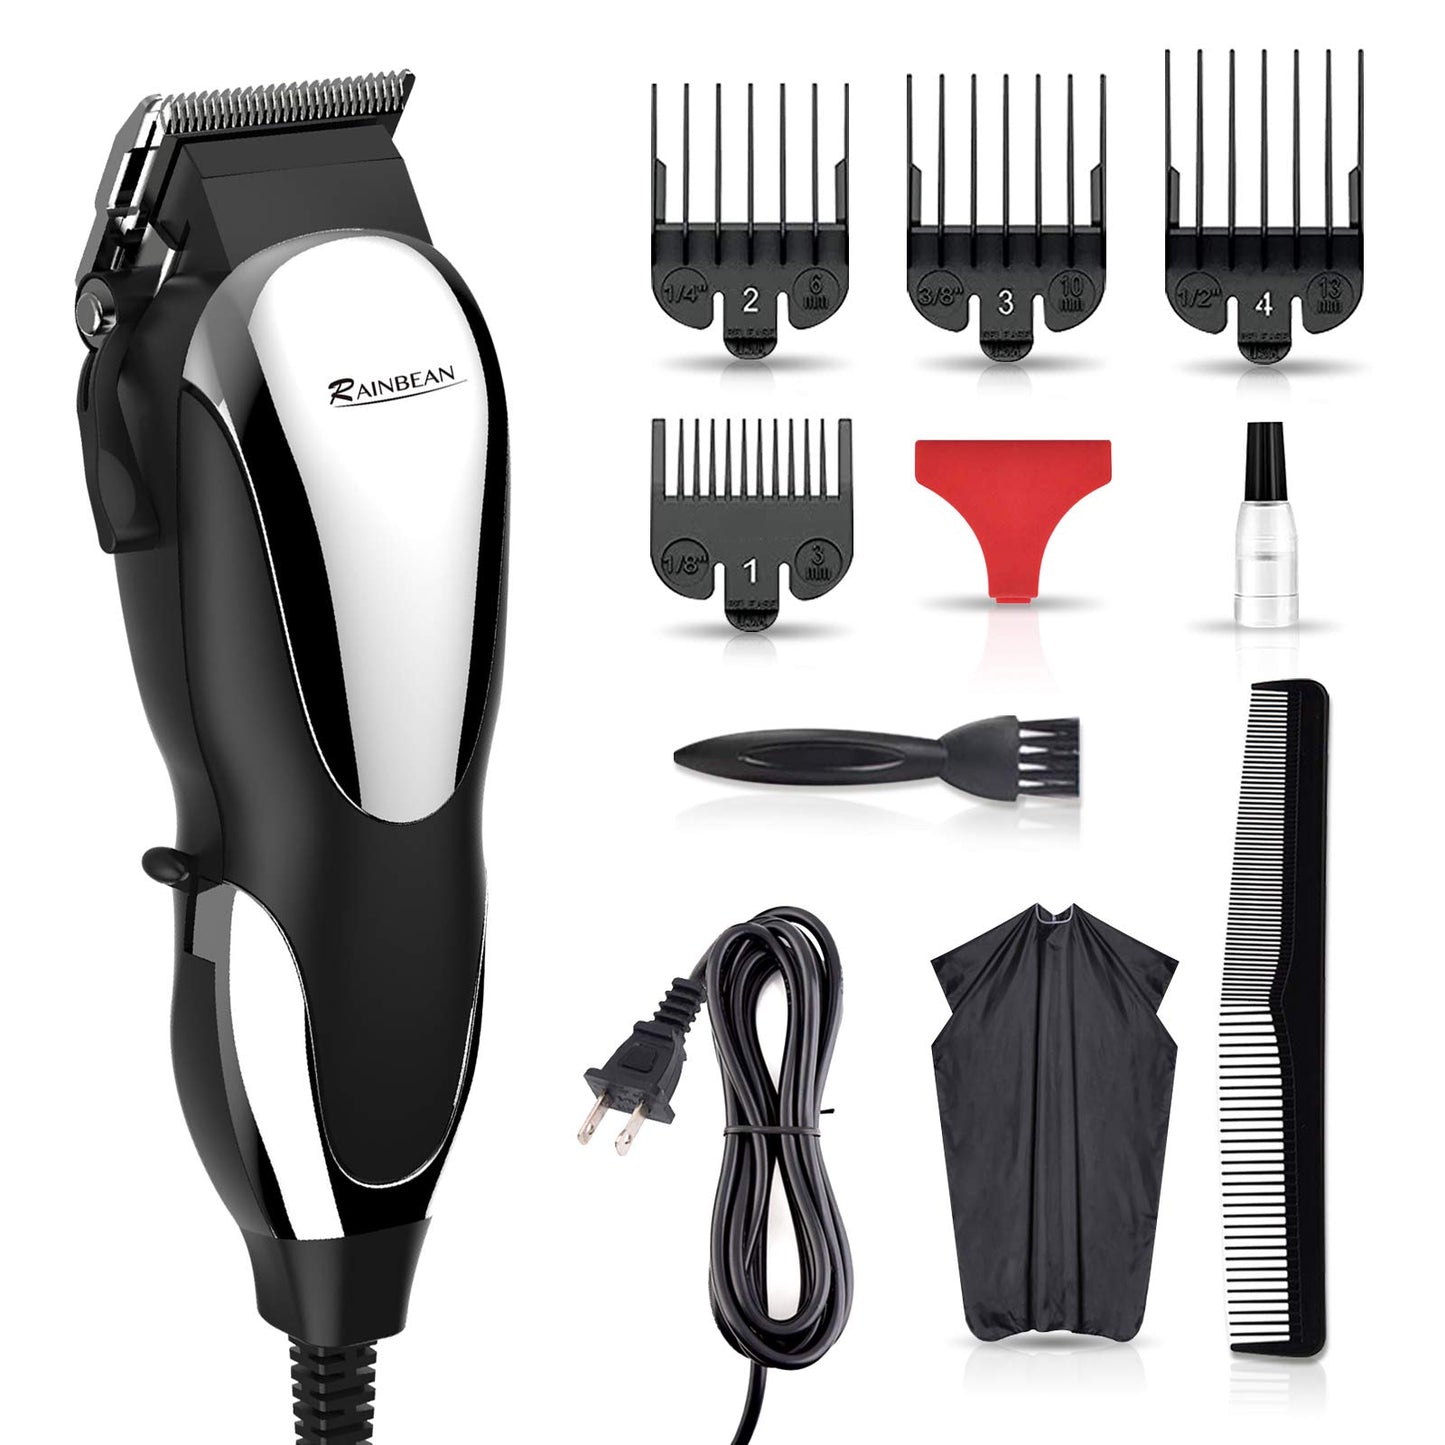 Professional Hair Clippers and Trimming Kit,